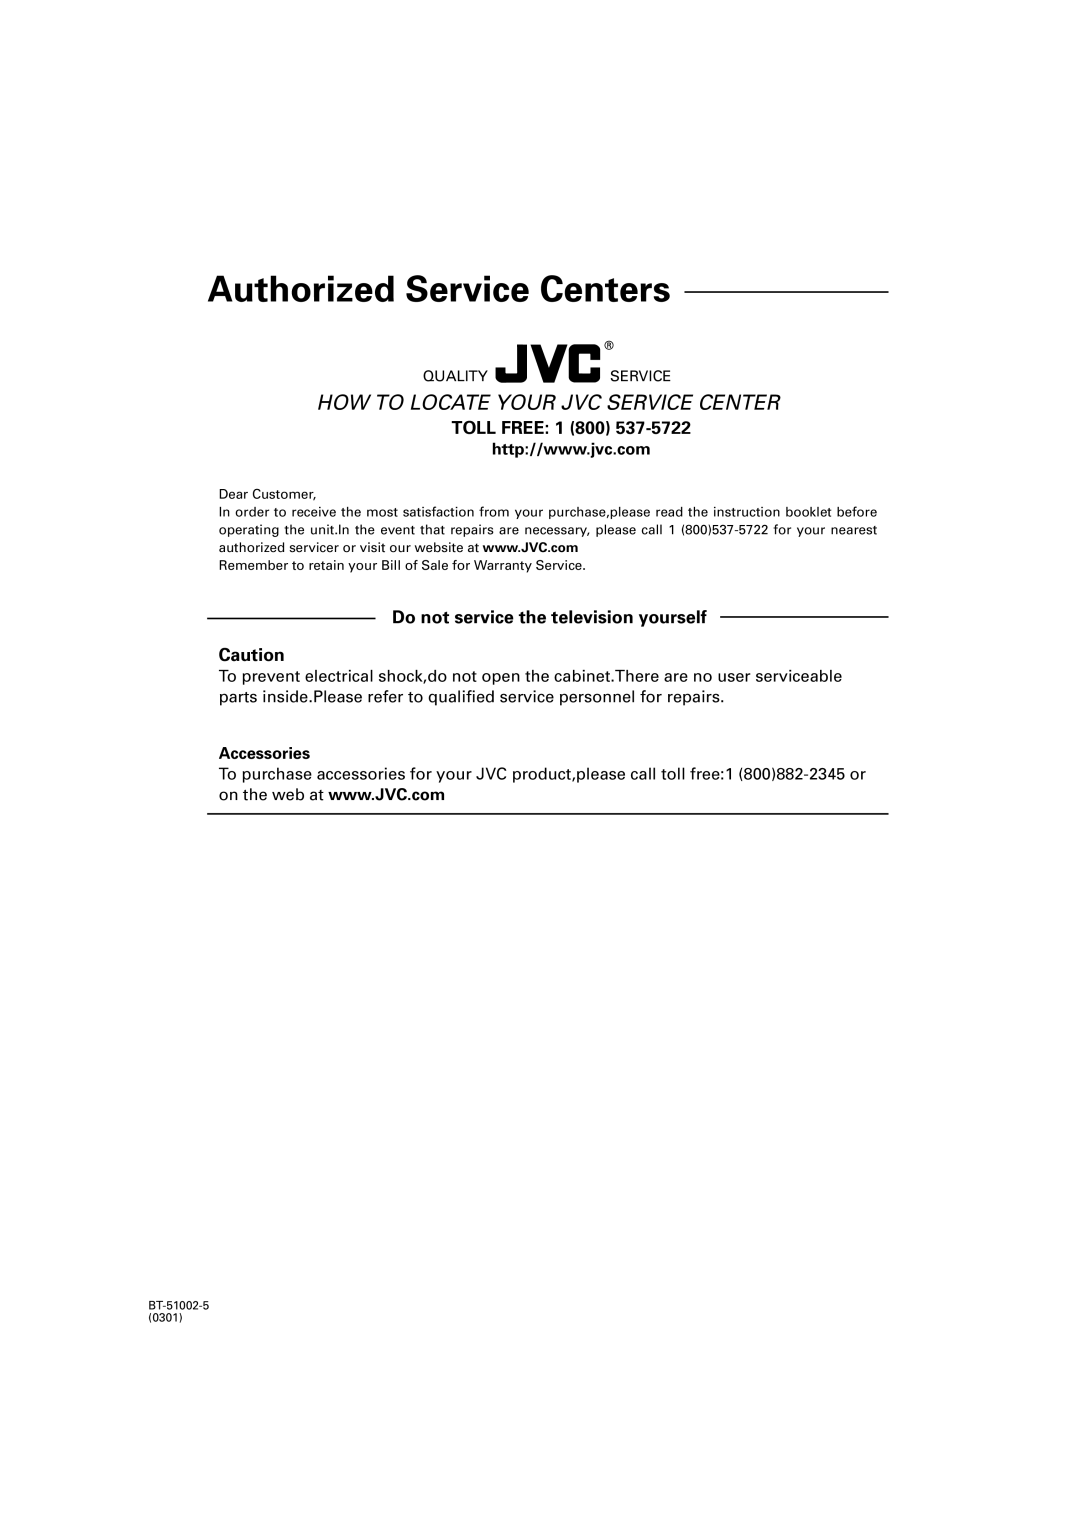 JVC RX7030VBK manual Authorized Service Centers, How To Locate Your Jvc Service Center, TOLL FREE: 1 800, Accessories 